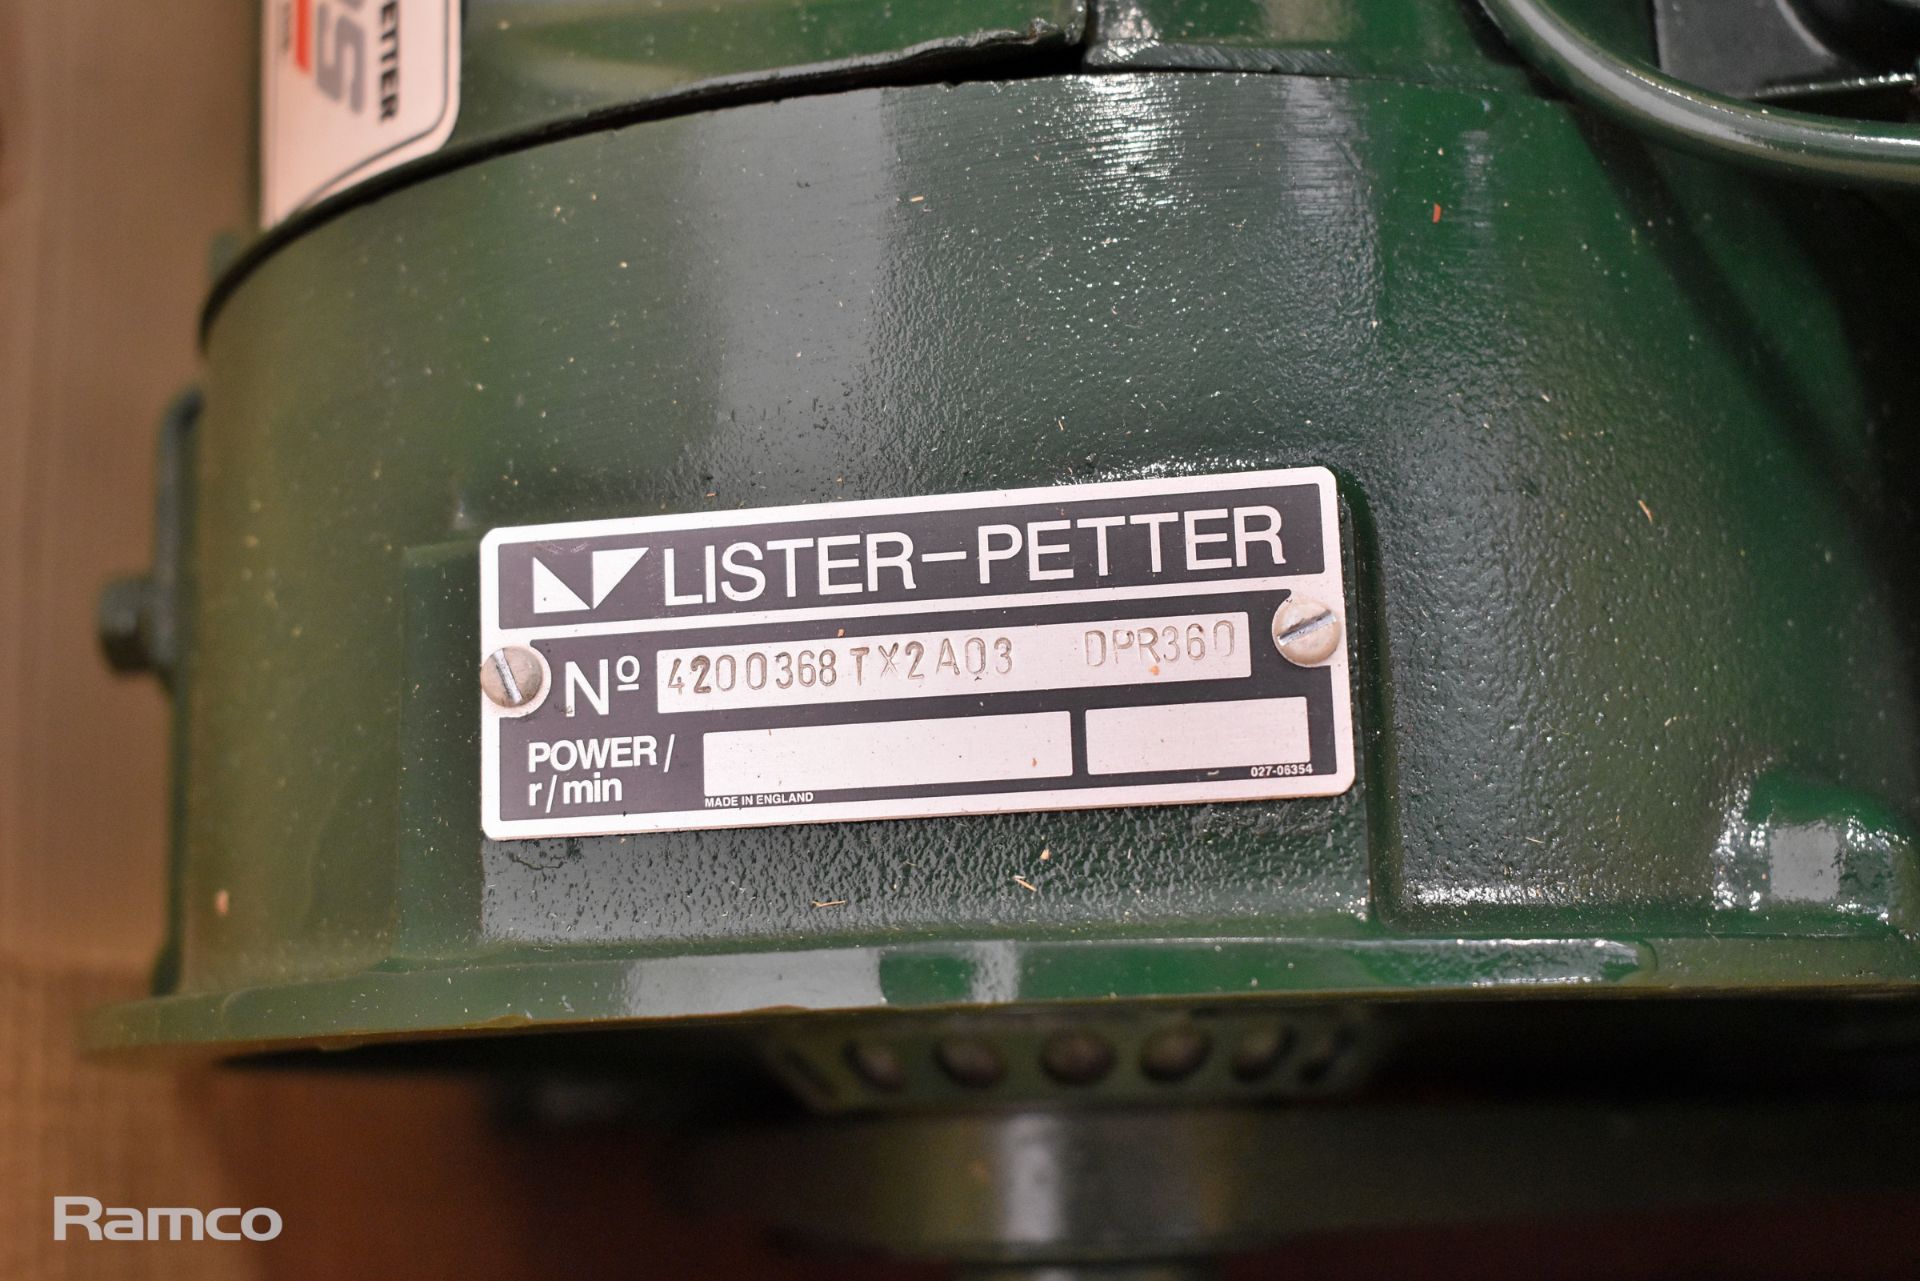 Lister Petter T-Series X3 diesel engine - Image 3 of 3